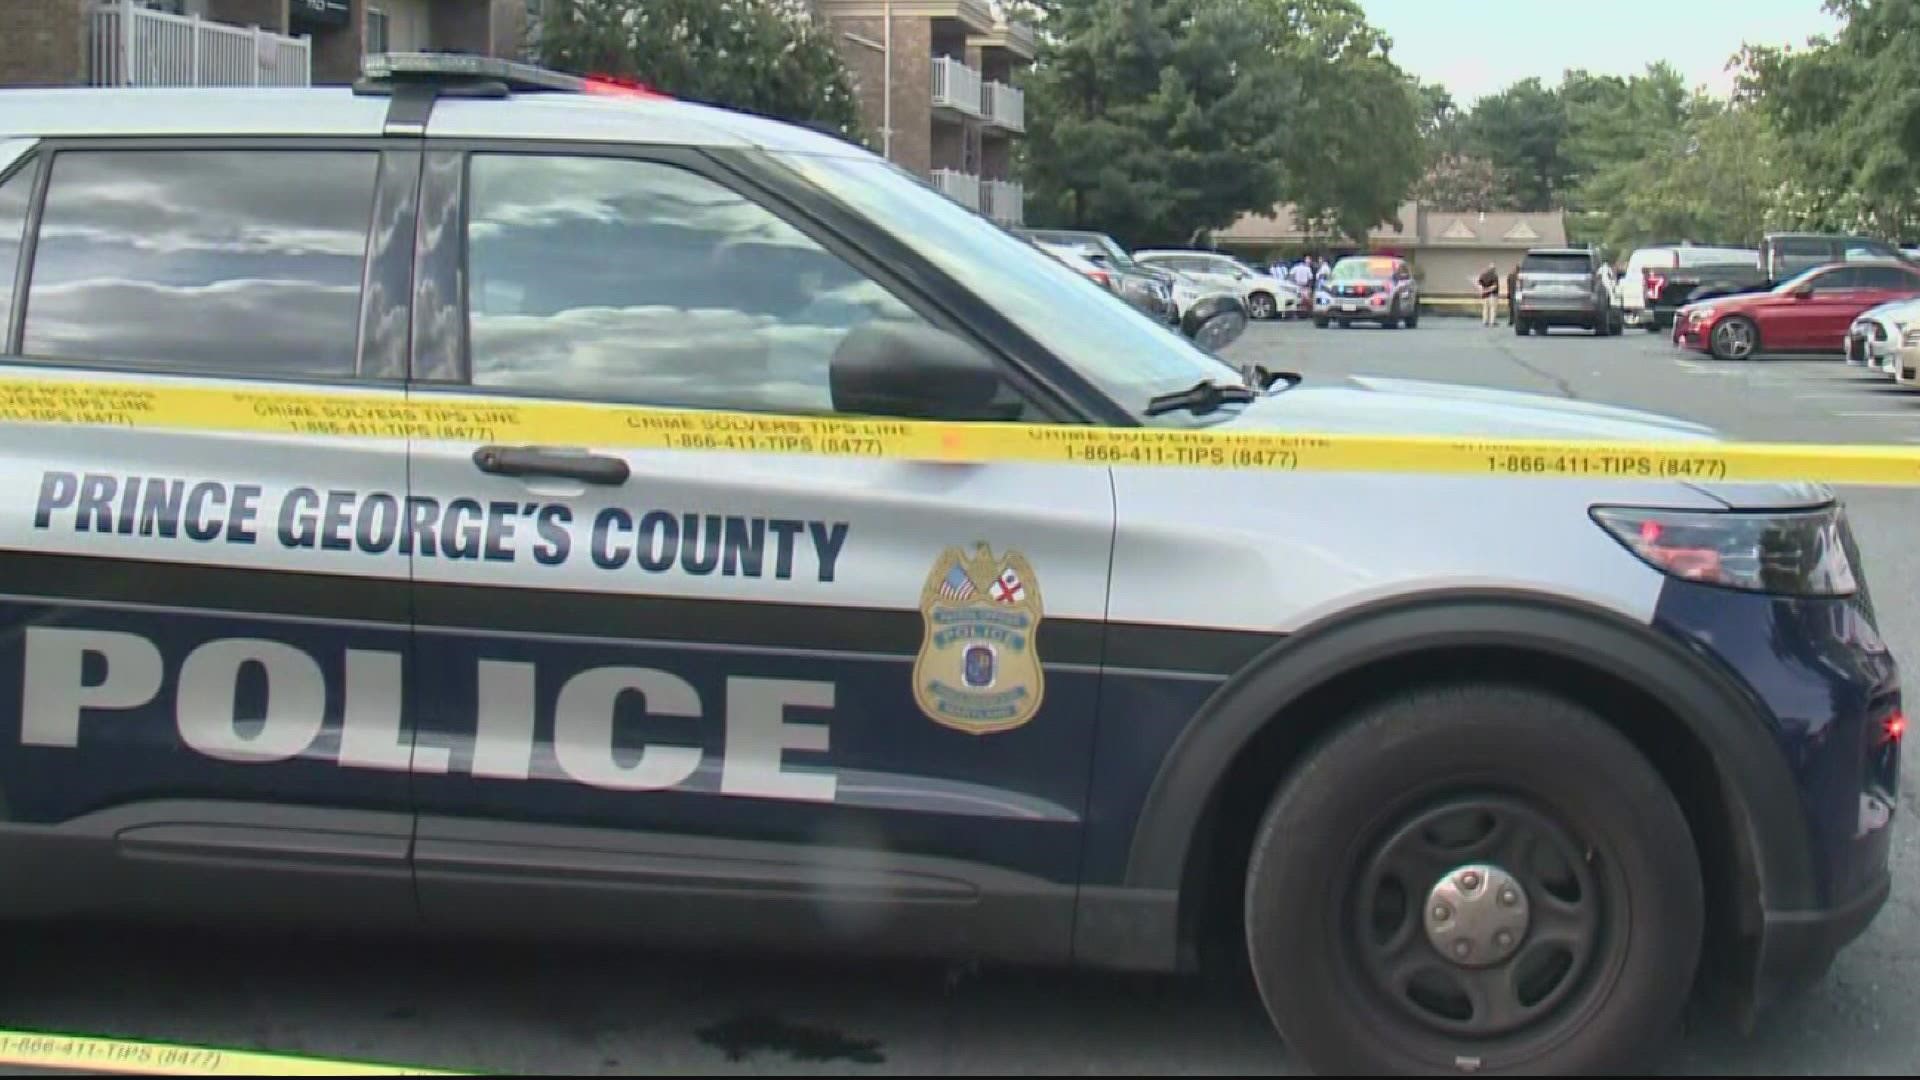 As part of an accountability push, Prince George's County will begin enforcing a youth curfew.